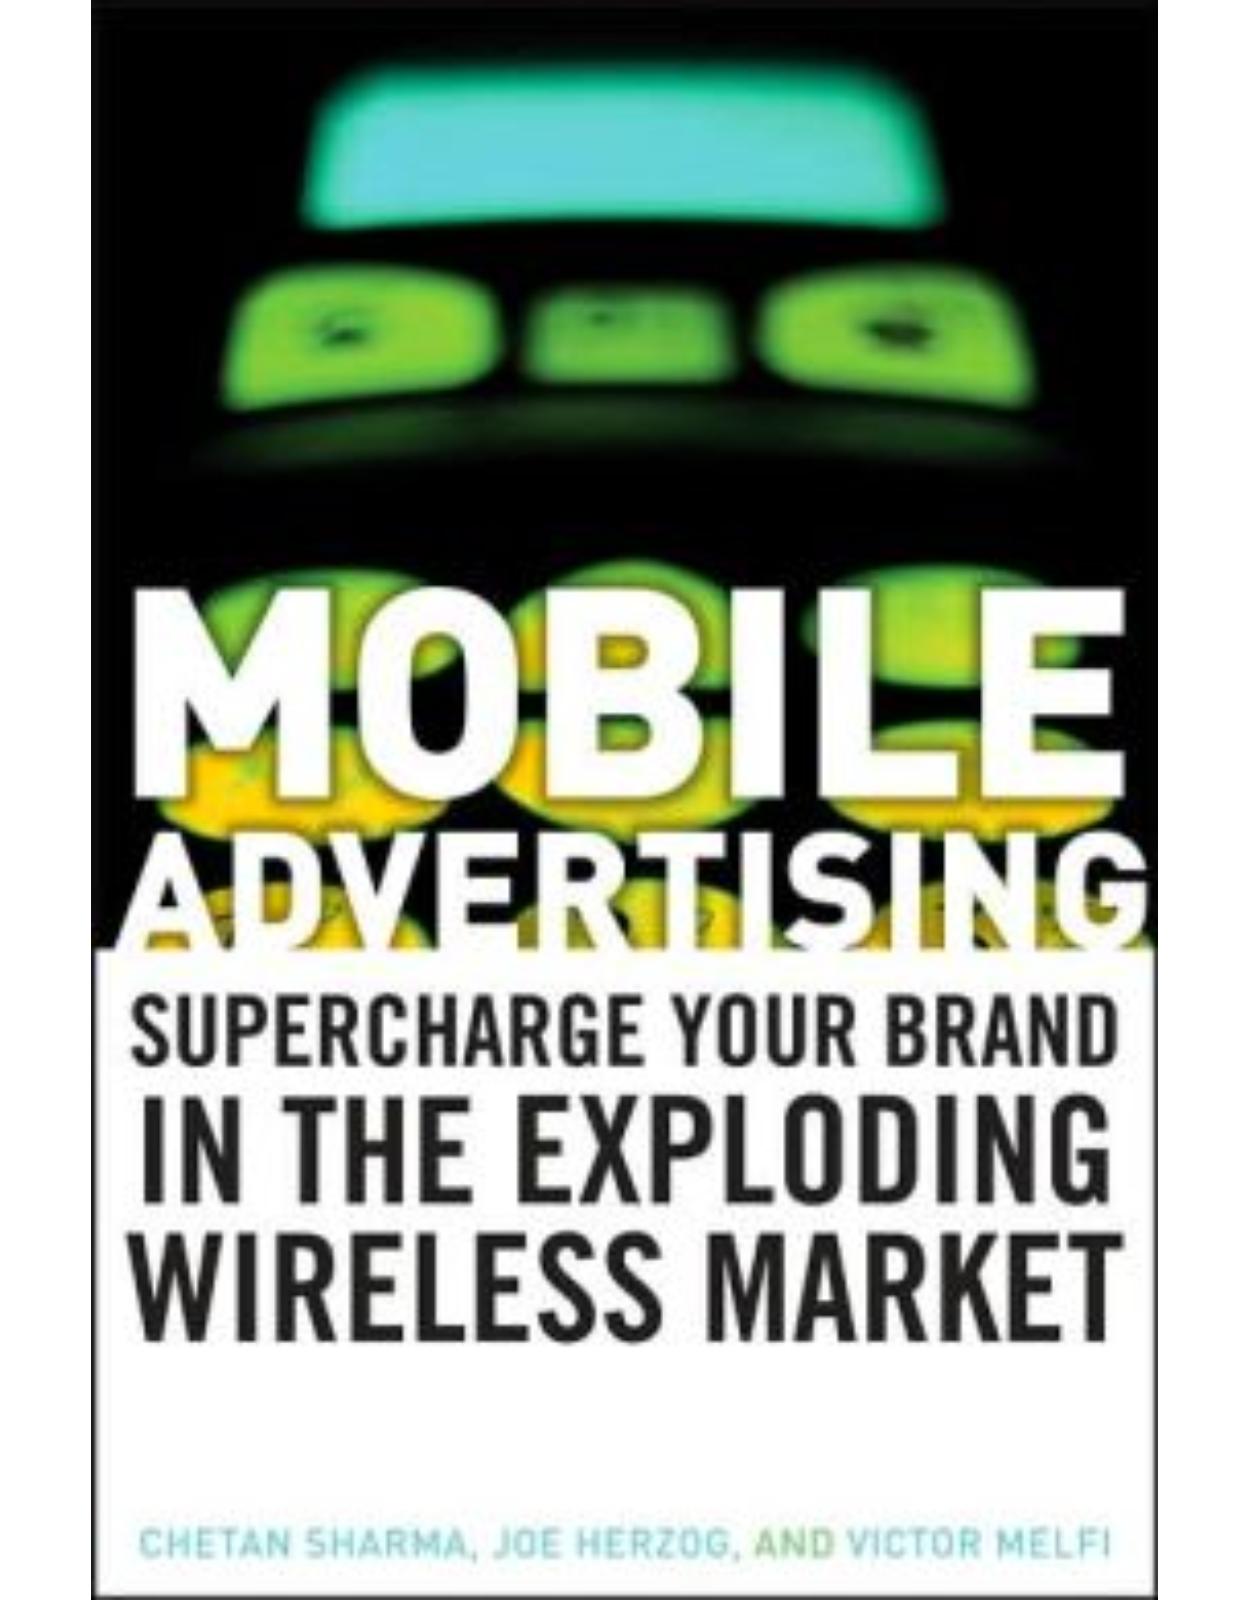 Mobile Advertising: Supercharge Your Brand in the Exploding Wireless Market